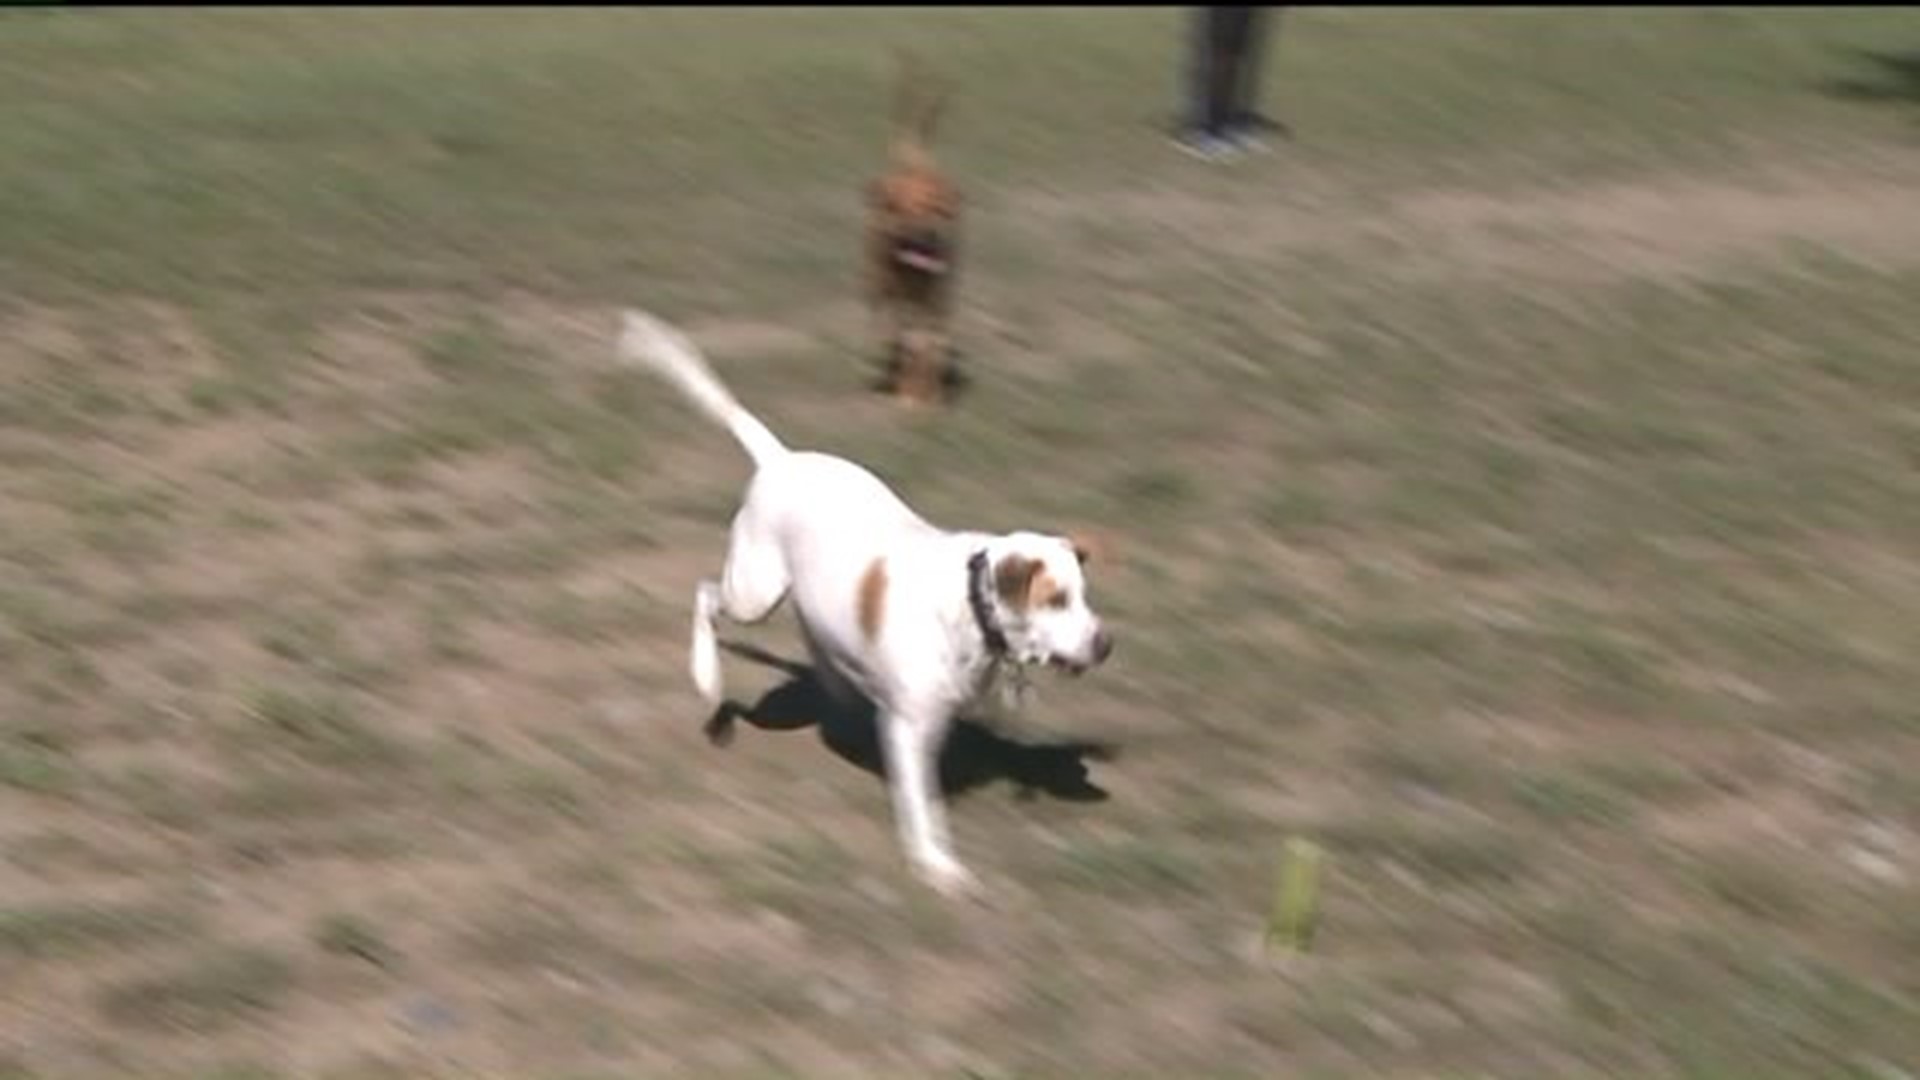 New Dog Park Opens in the Poconos